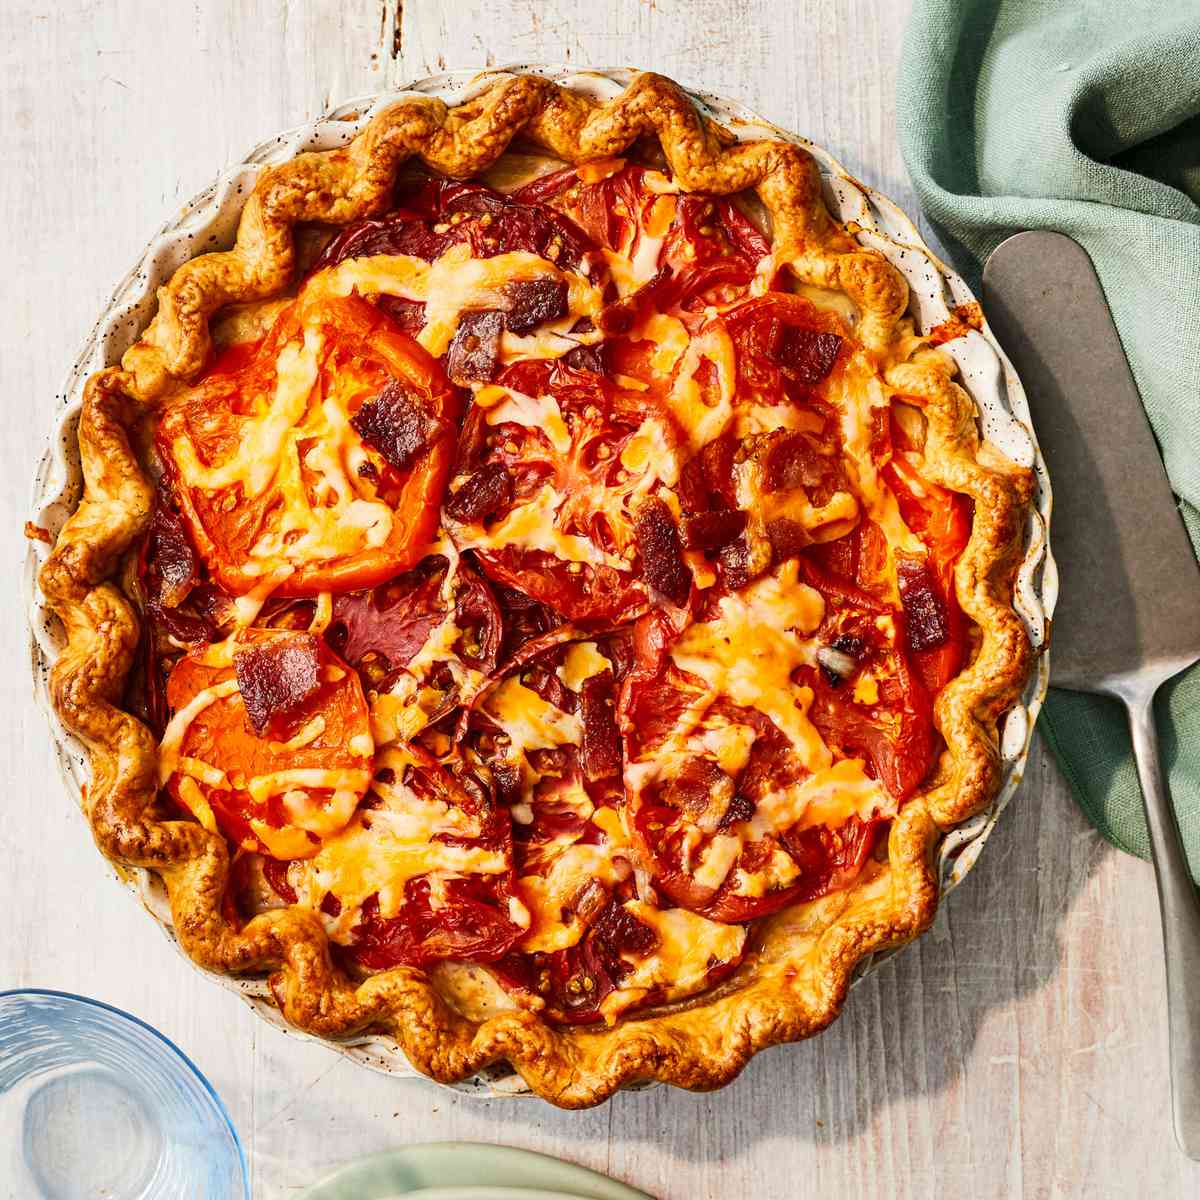 77 Fresh Tomato Recipes To Make All Summer Long | Southern Living